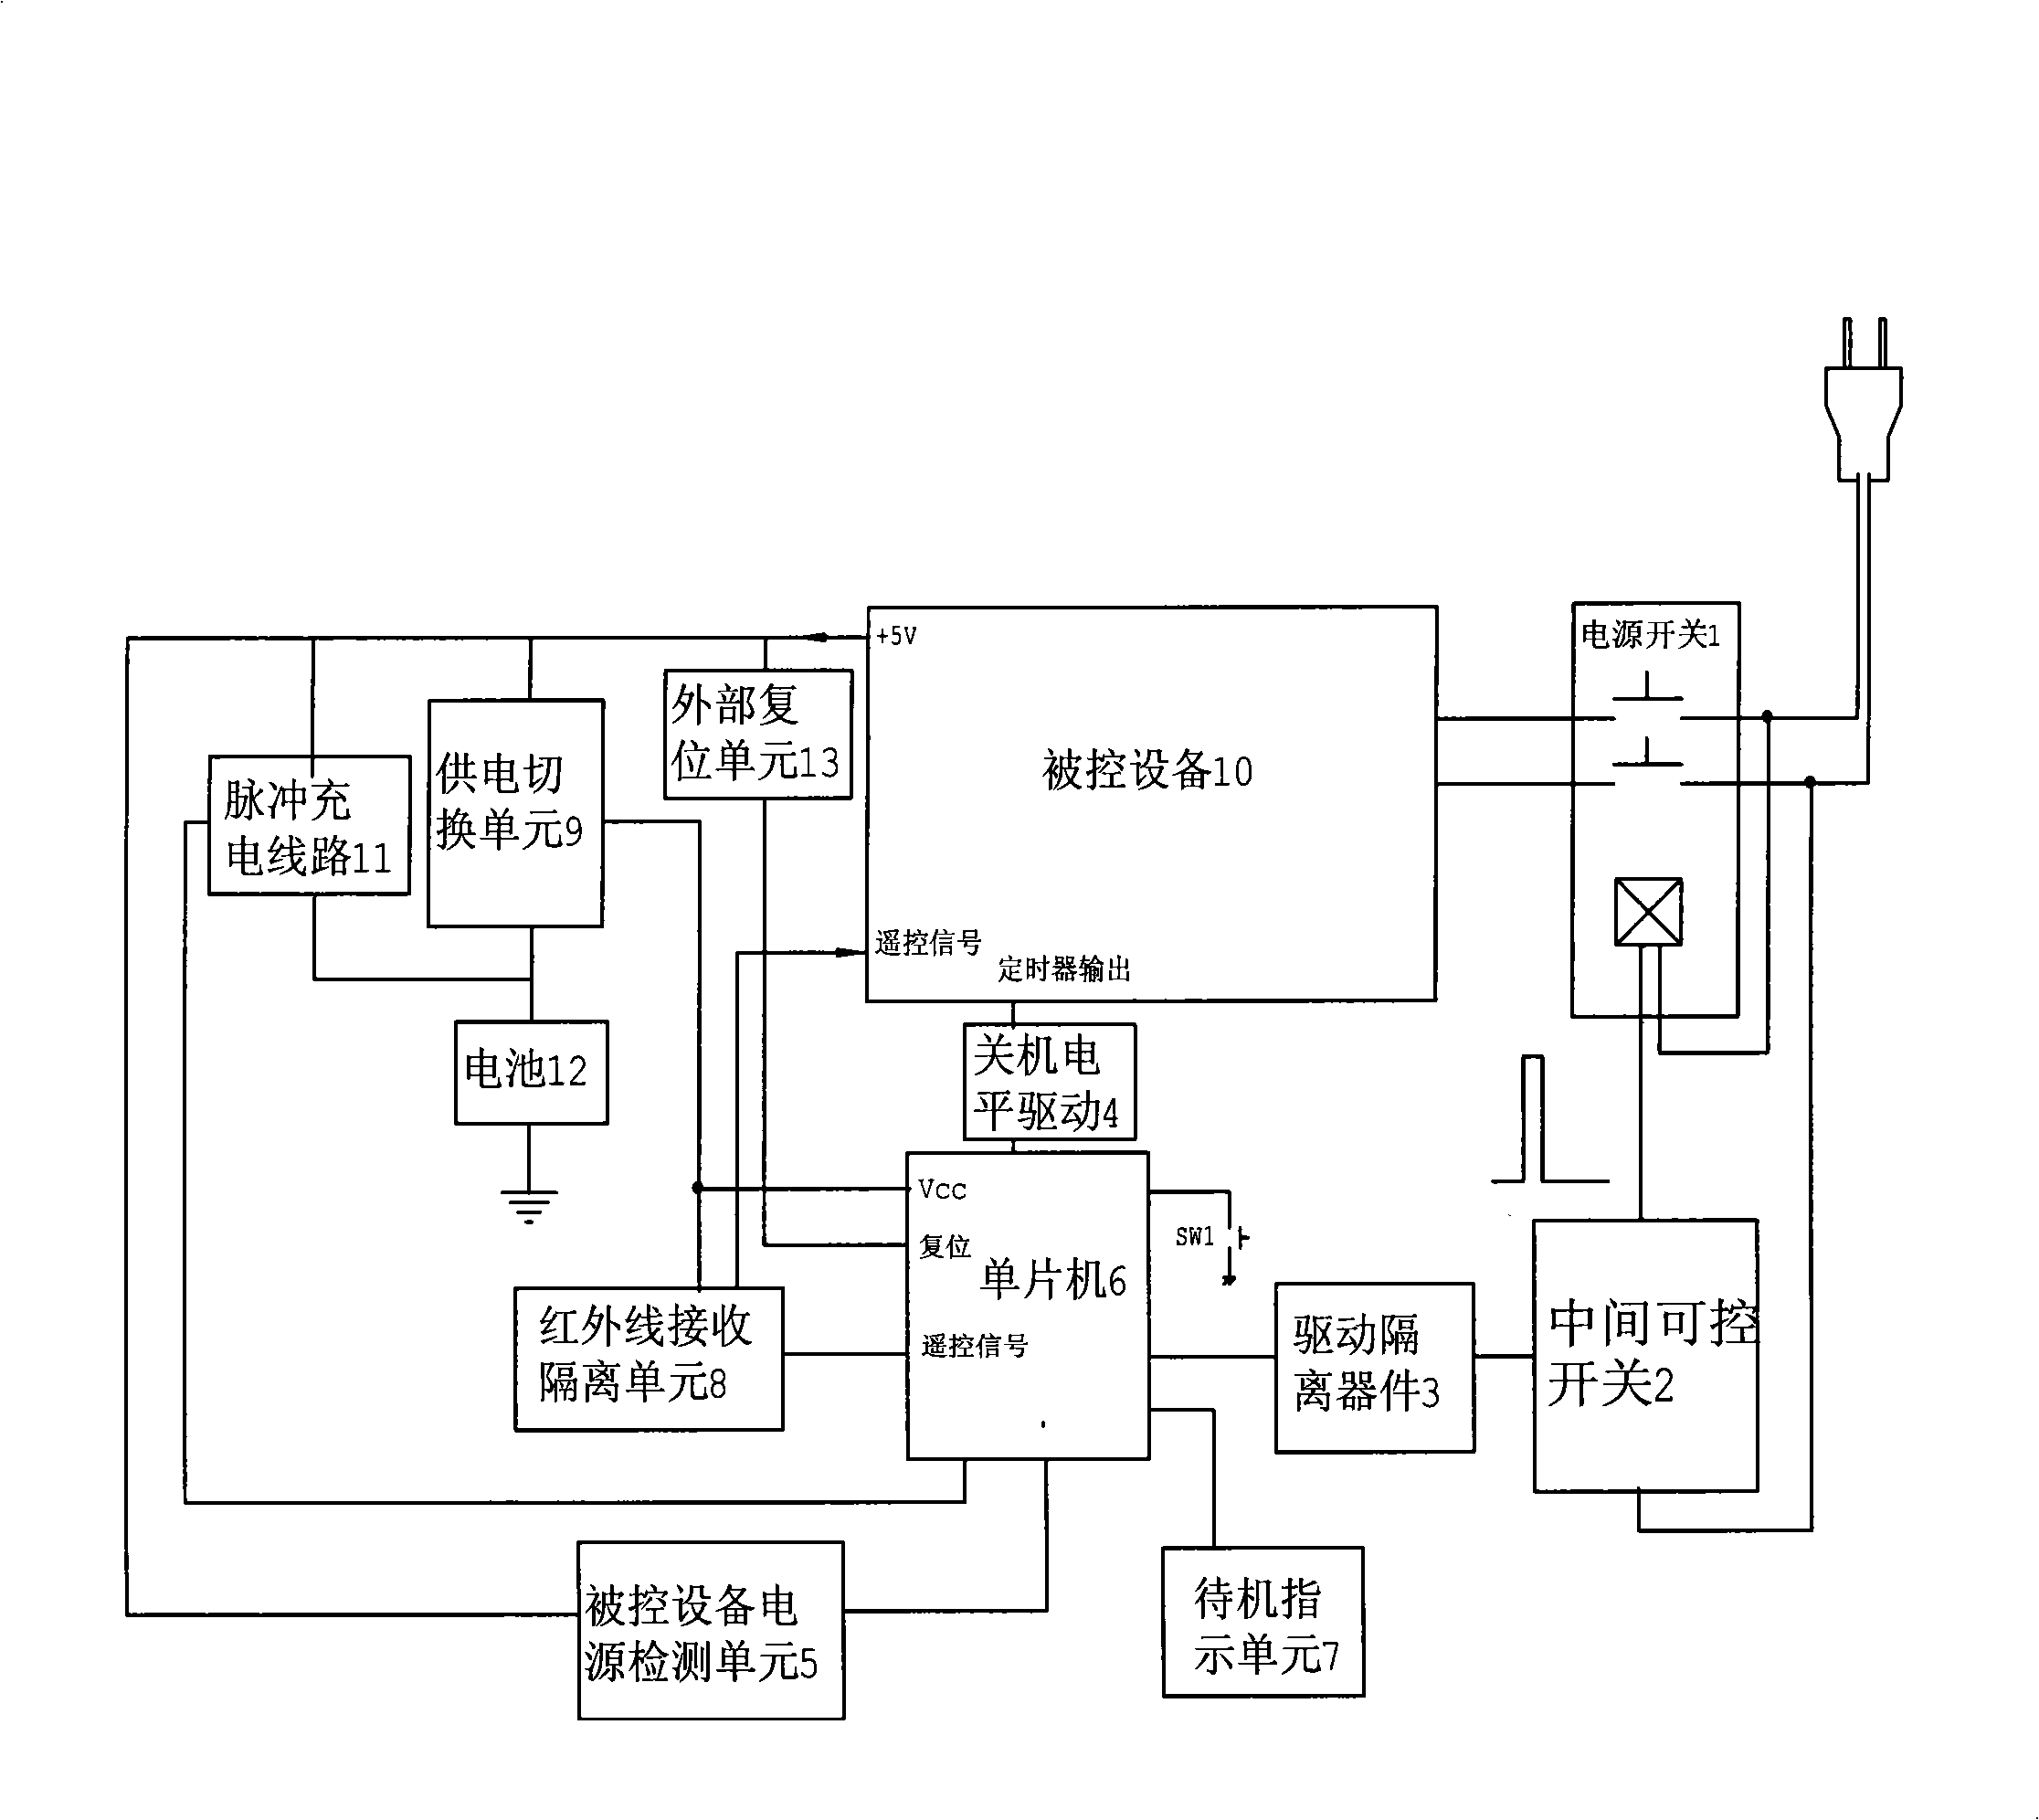 Power supply switch and control device for implementing nought power consumption standby